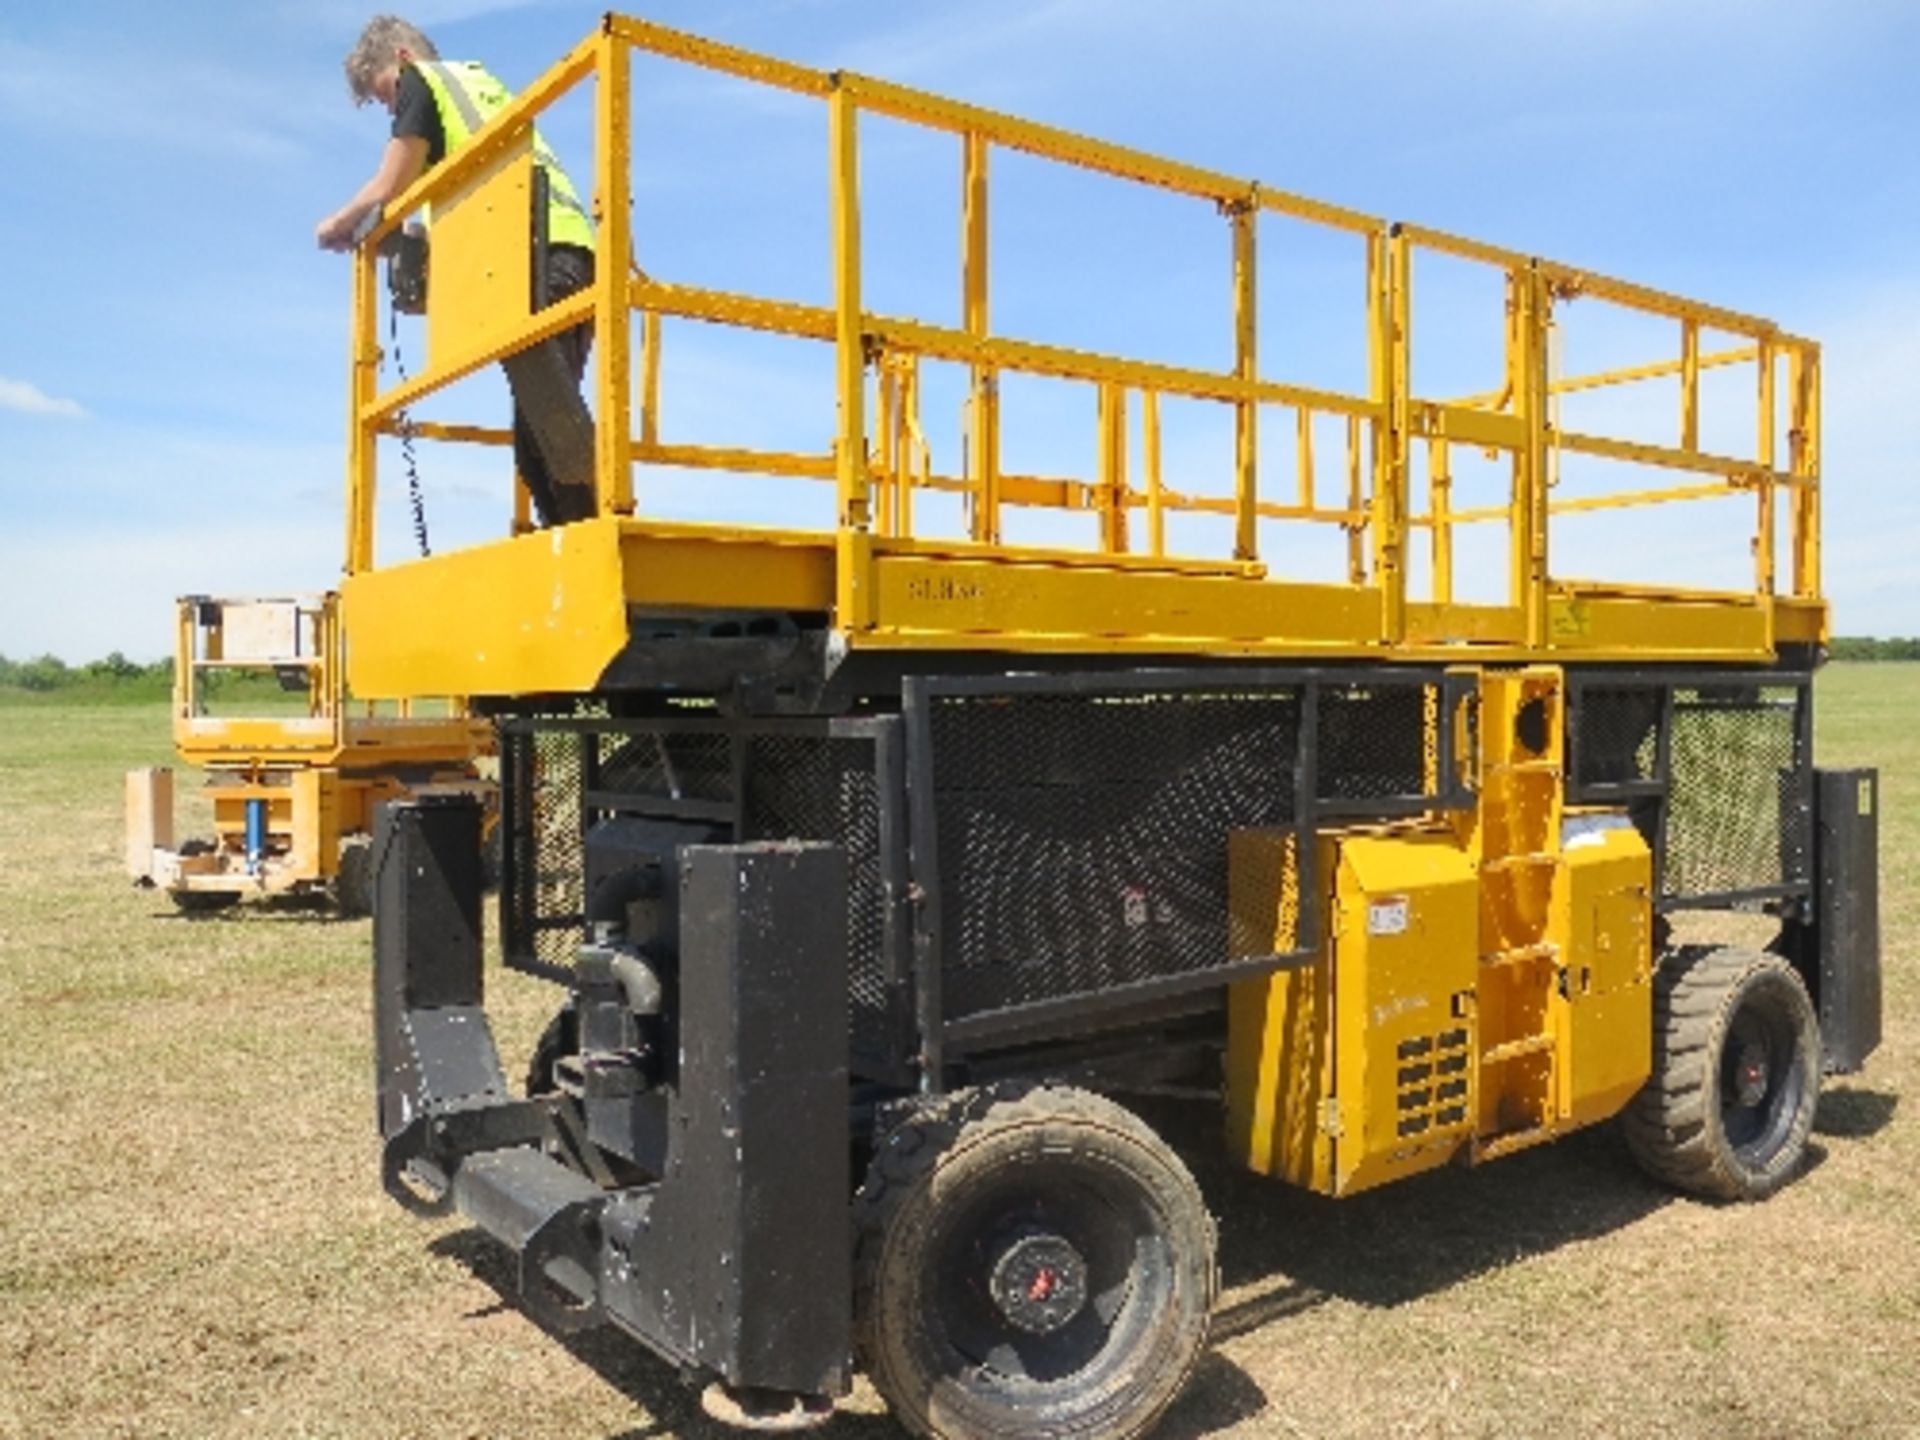 Genie GS4390 scissor lift 2004 SL964ALL LOTS are SOLD AS SEEN WITHOUT WARRANTY expressed, given or - Image 4 of 4